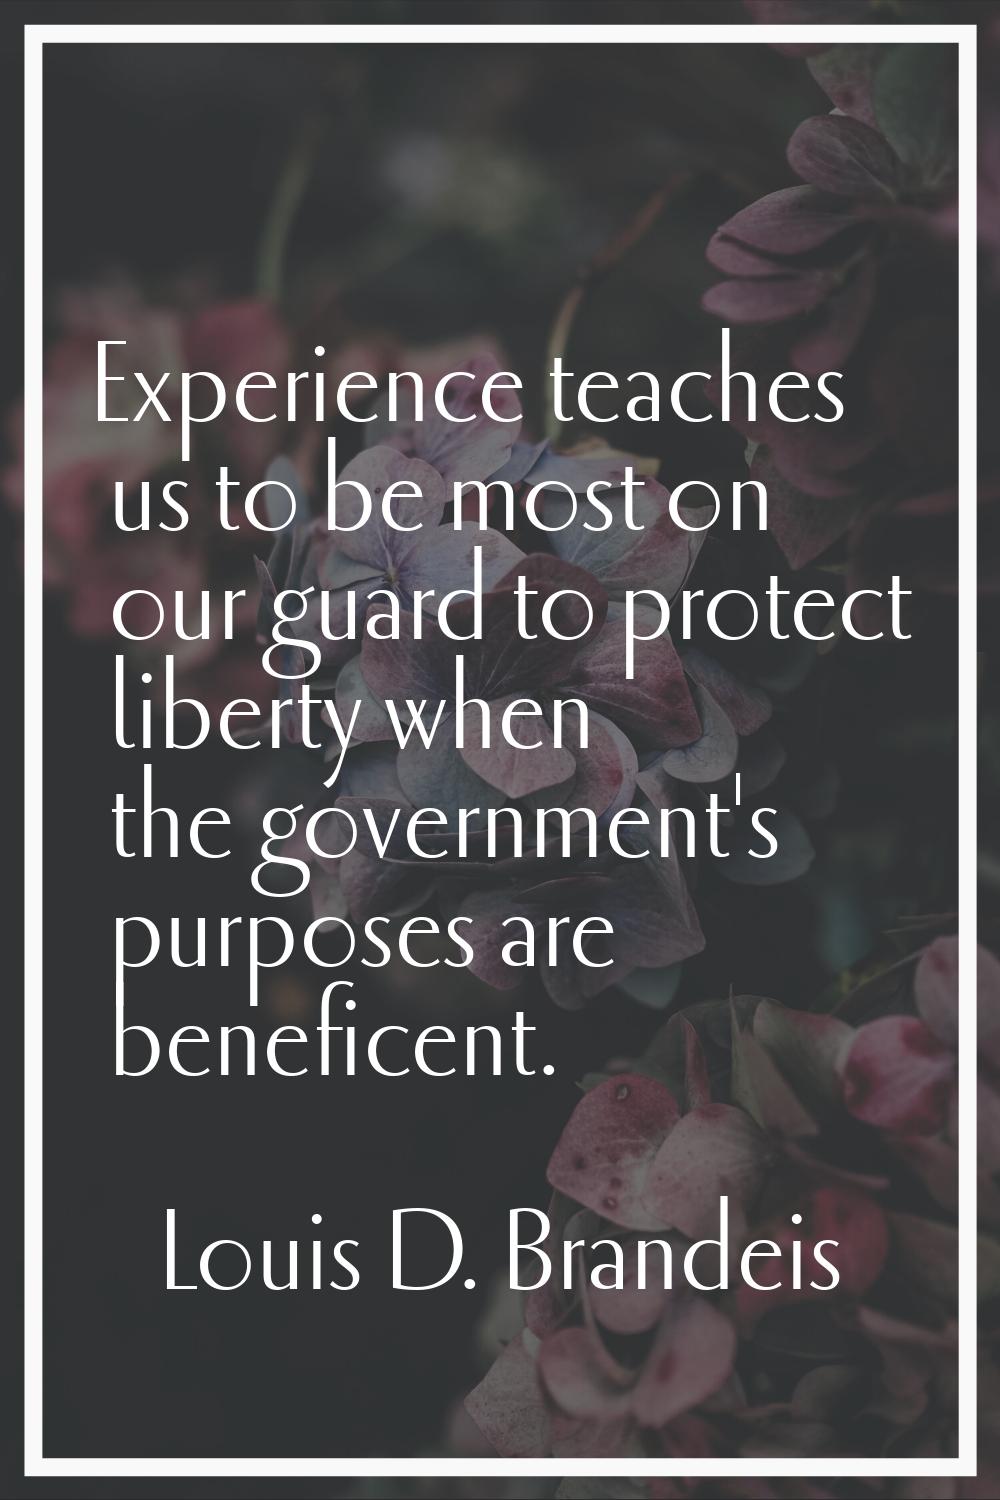 Experience teaches us to be most on our guard to protect liberty when the government's purposes are